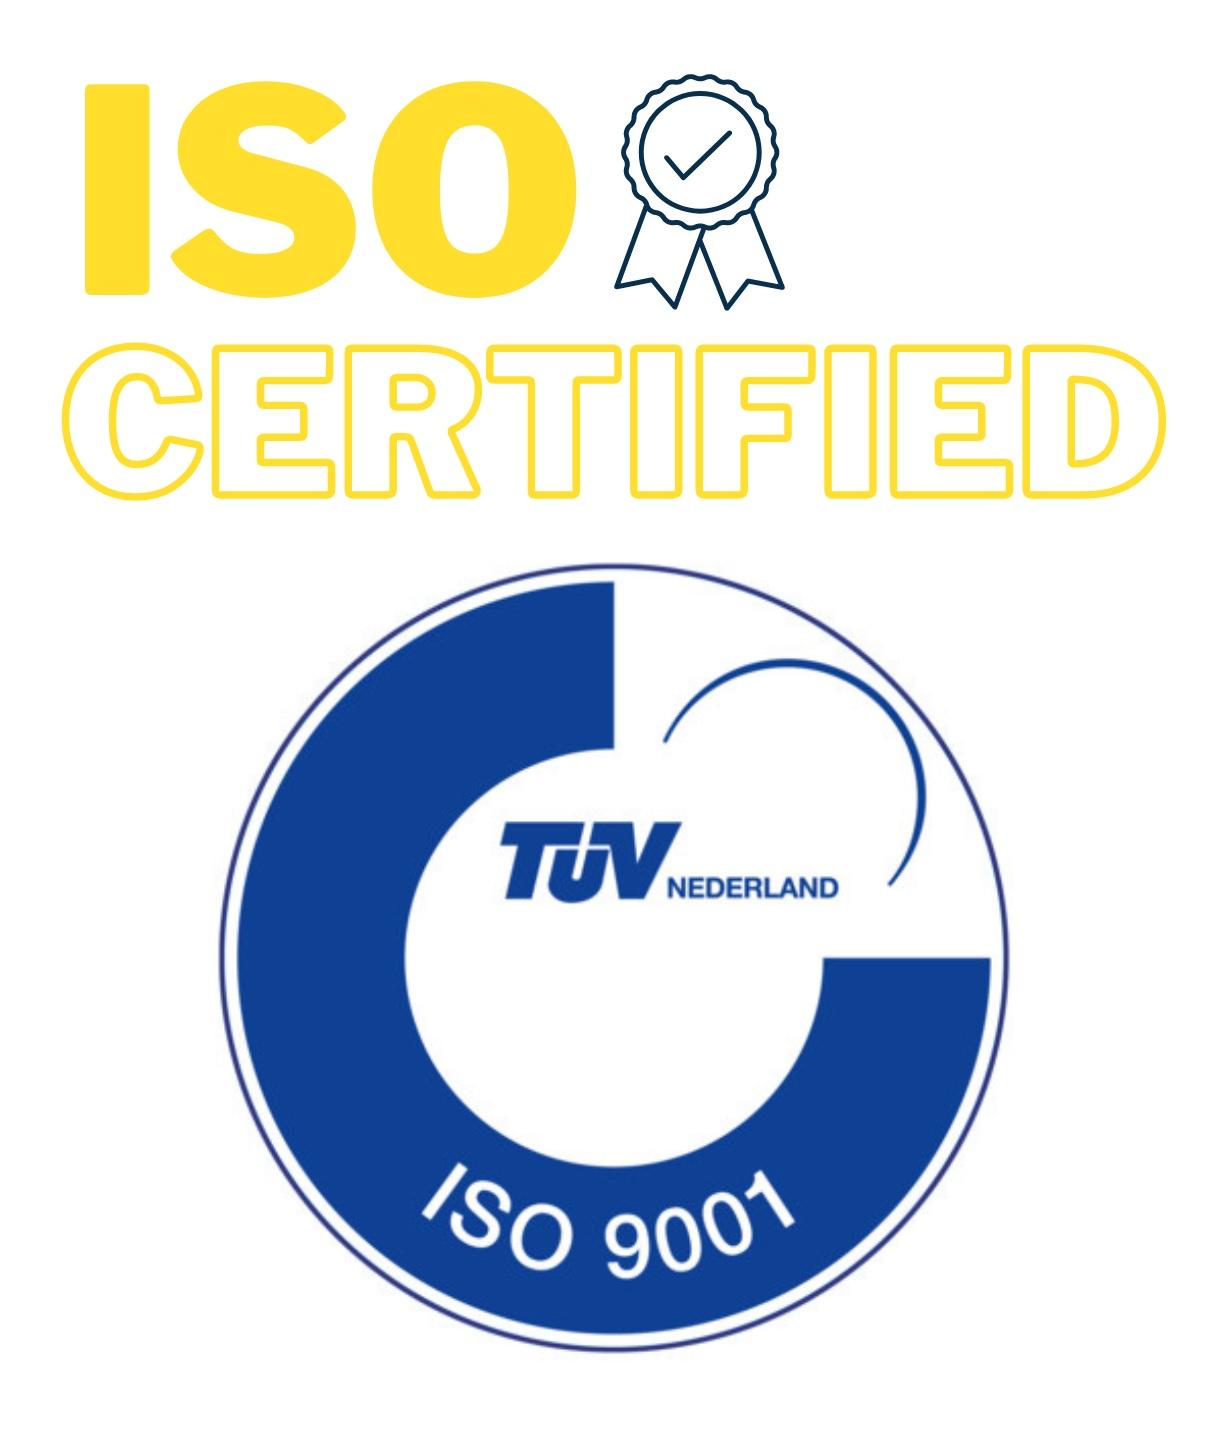 Image ISO certified